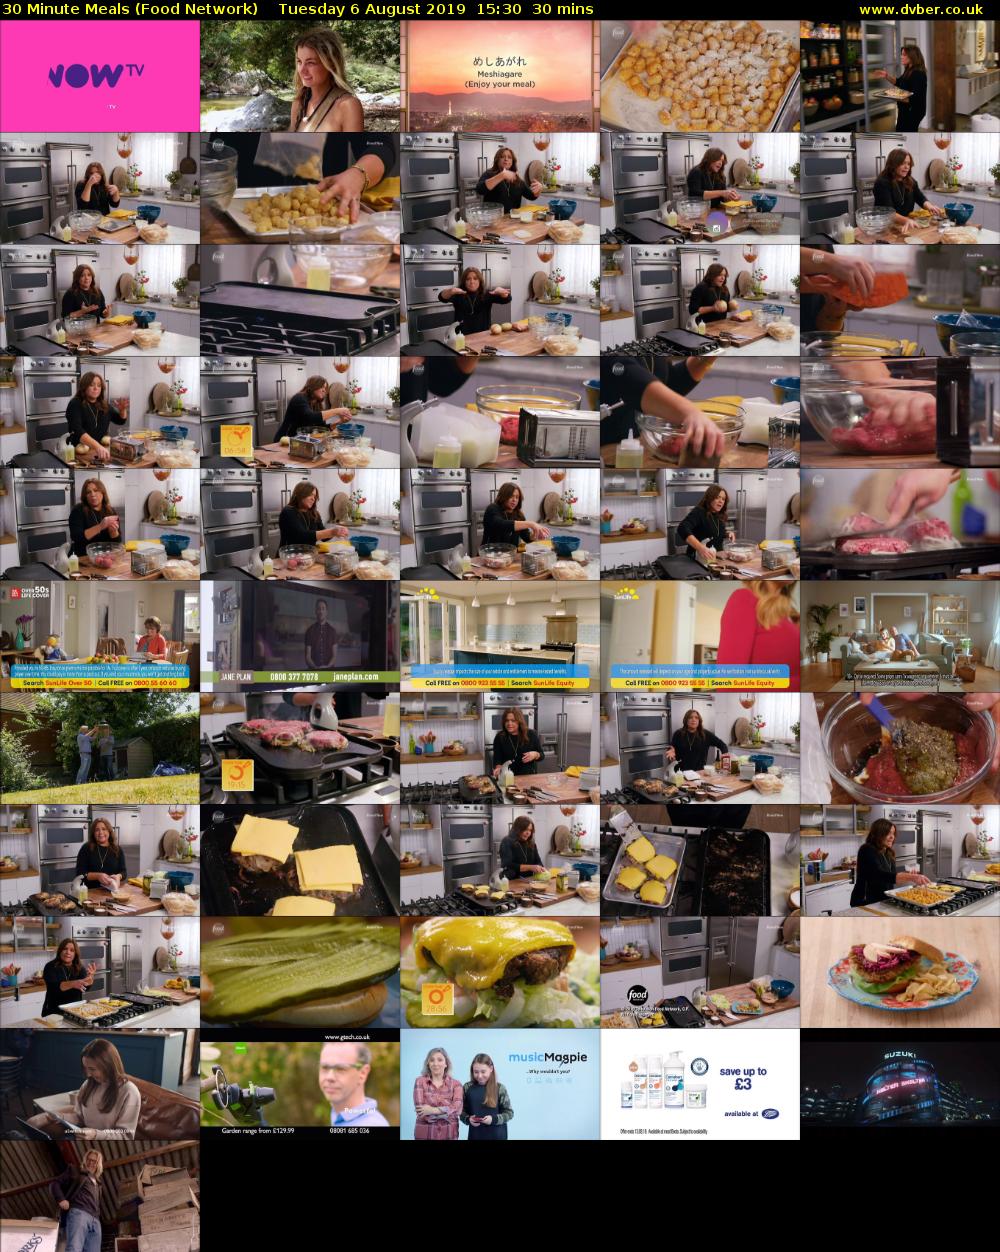 30 Minute Meals (Food Network) Tuesday 6 August 2019 15:30 - 16:00